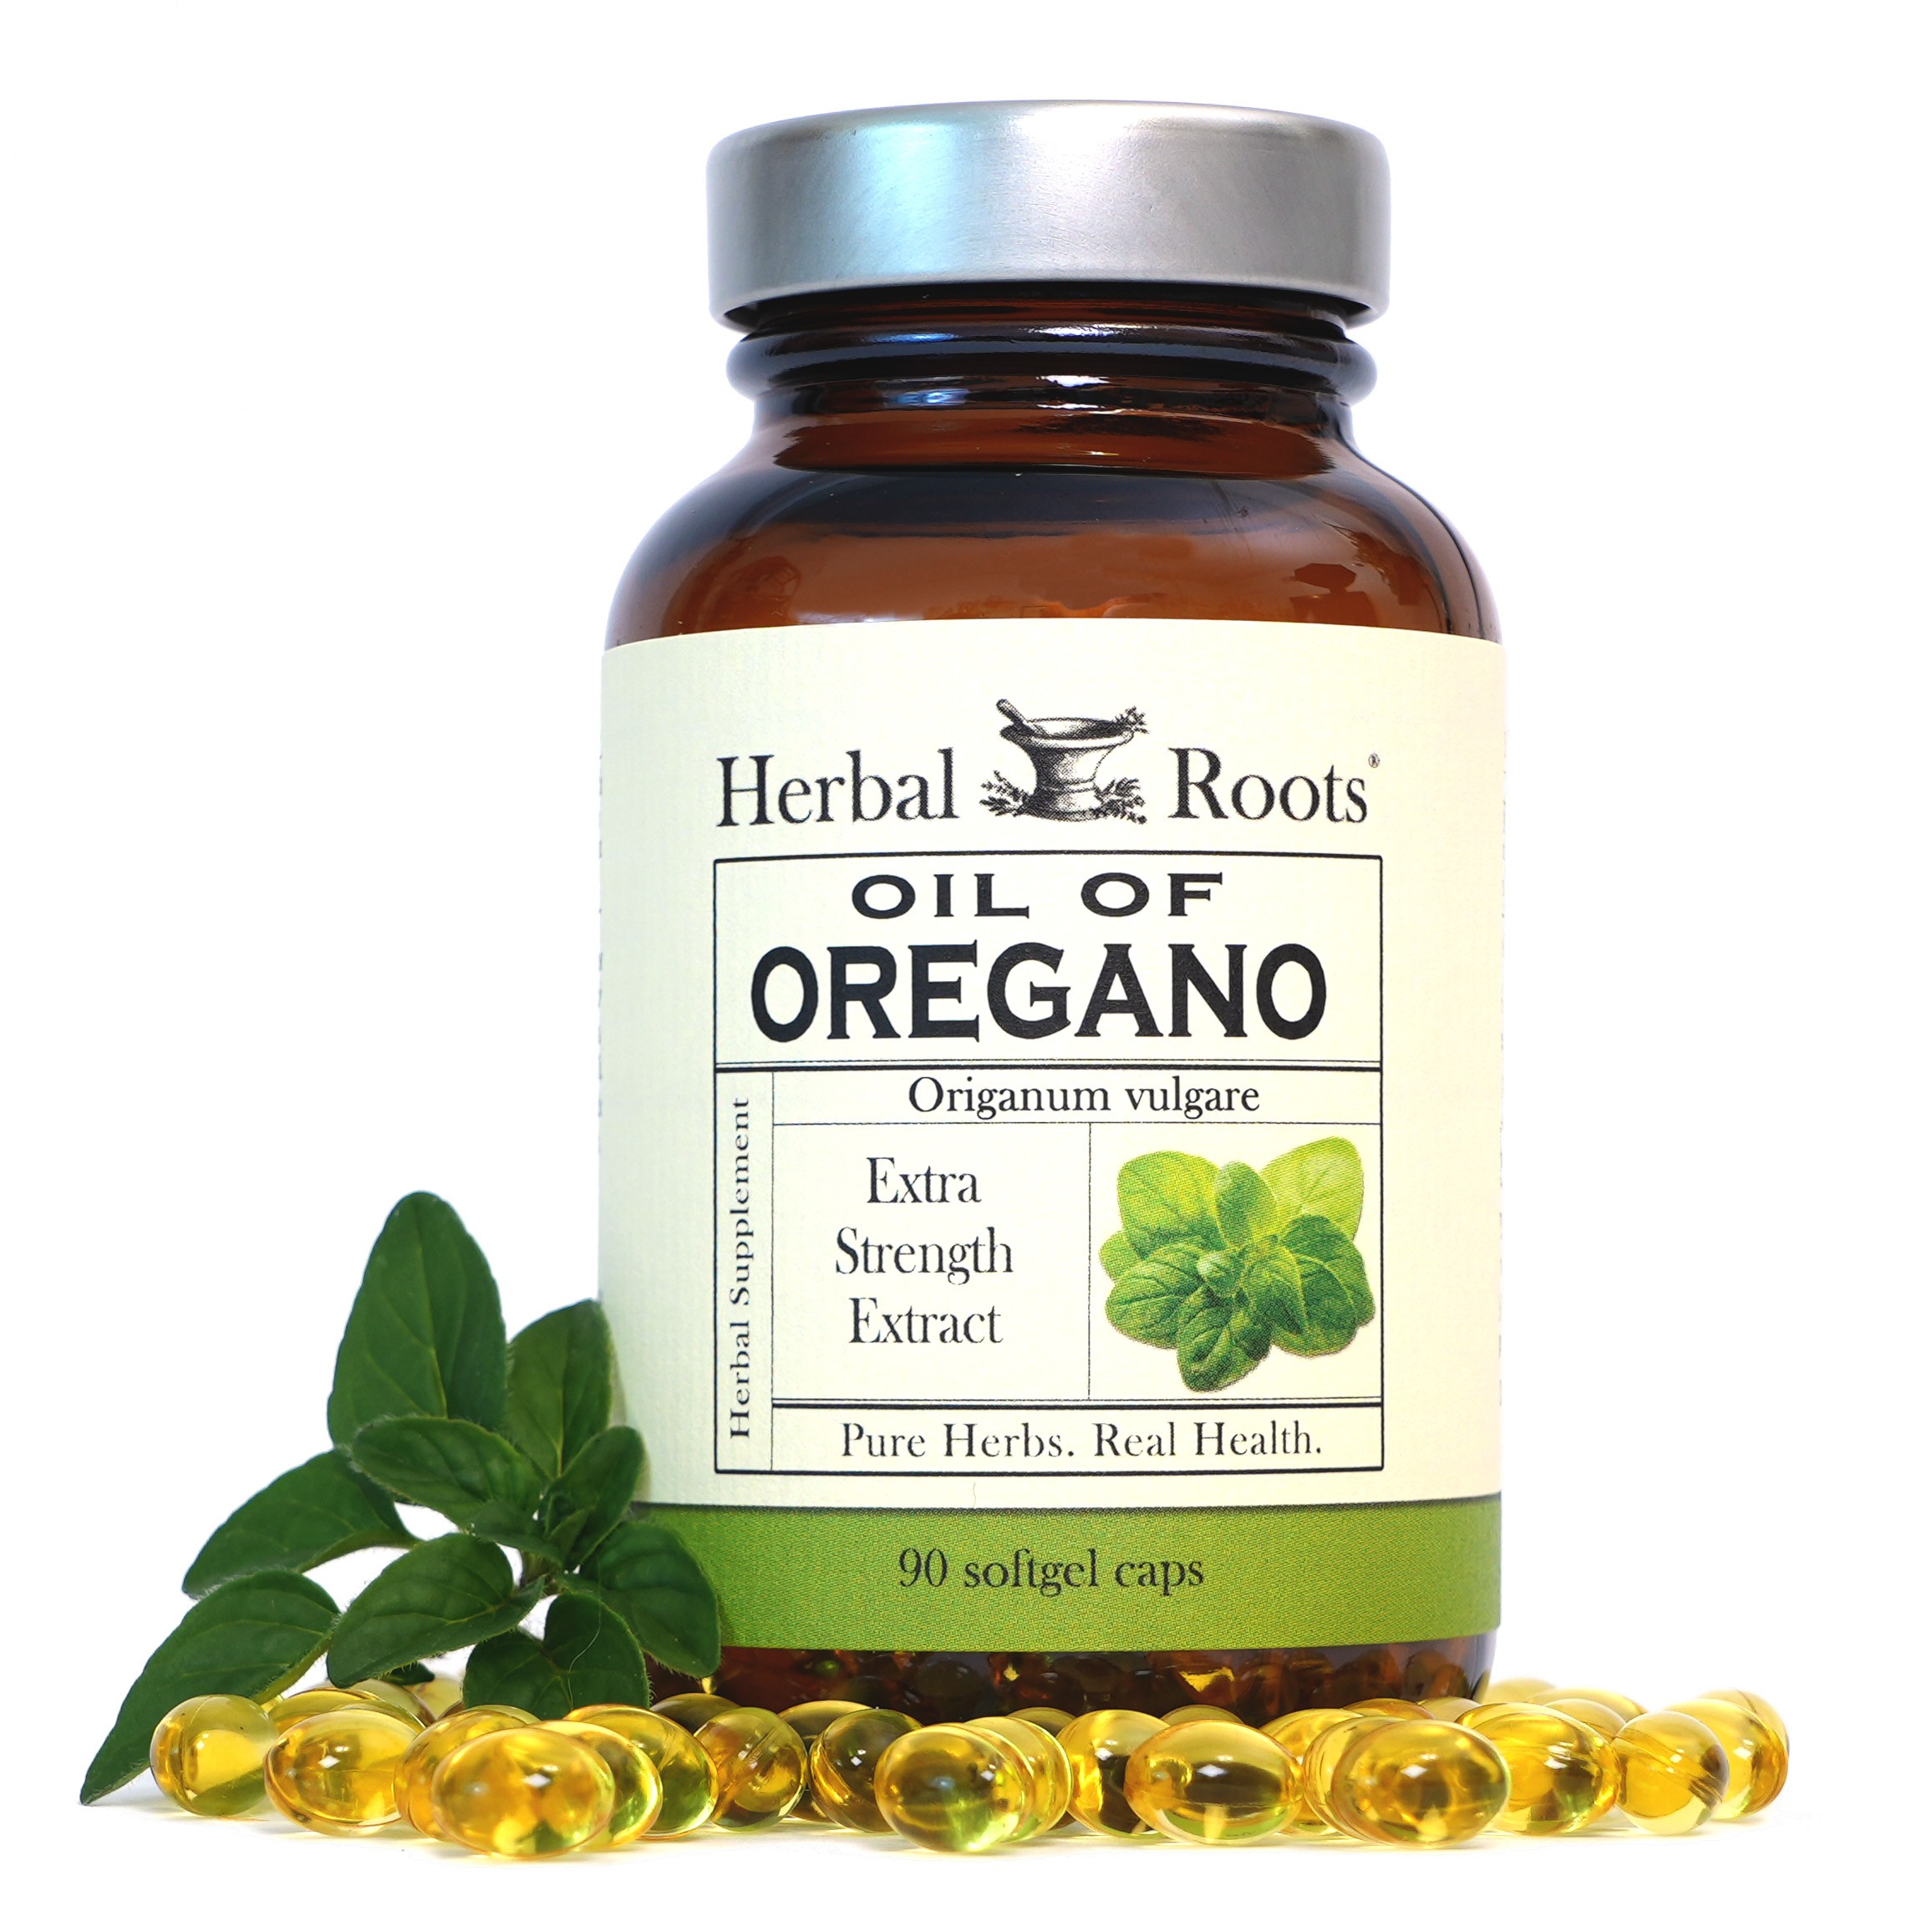 Herbal Roots Oregano oil bottle with yellow gel caps and fresh oregano